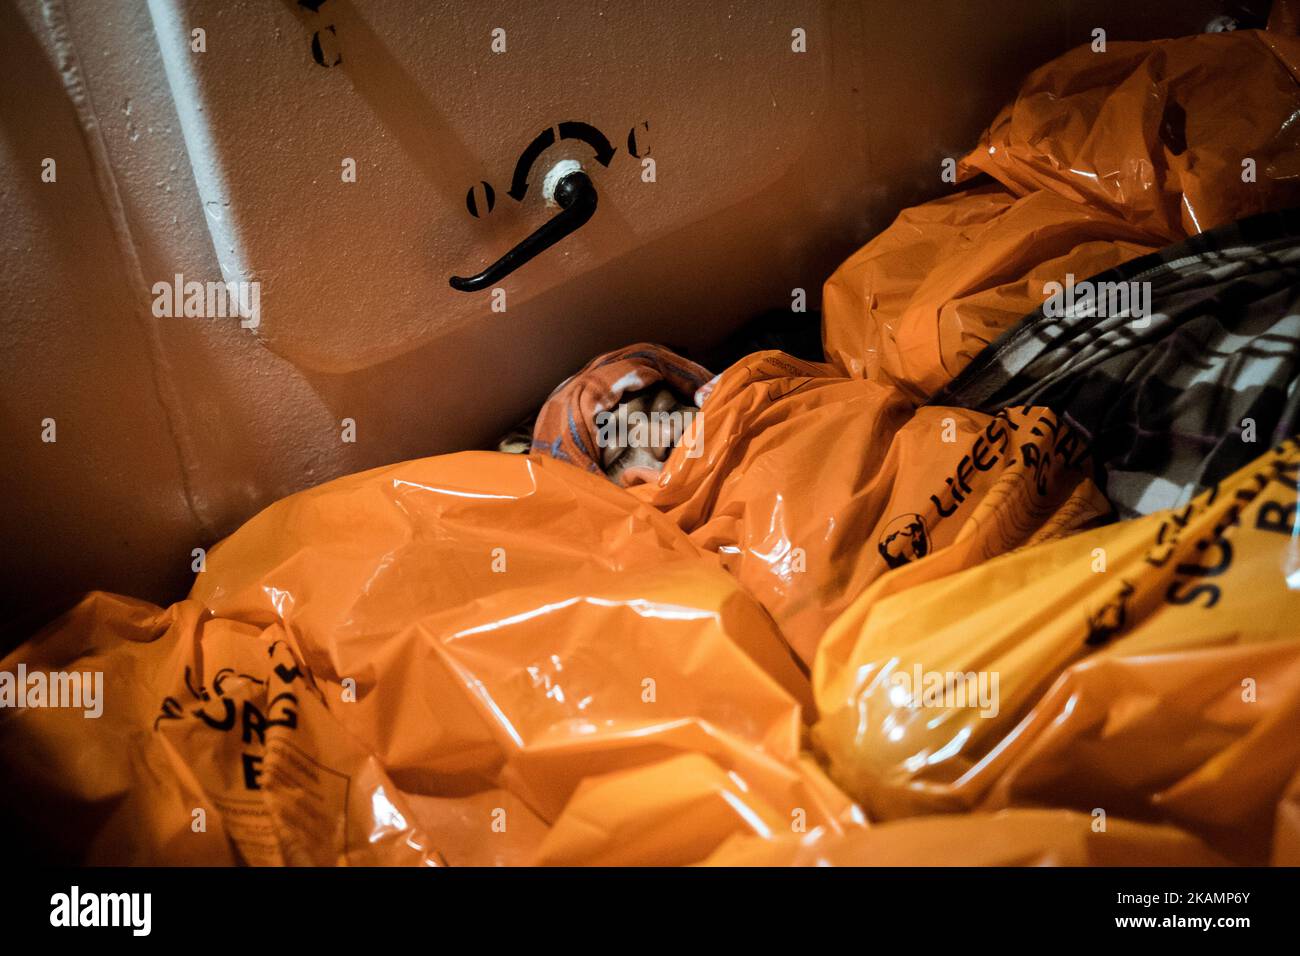 February 22nd 2017. Migrants squeezed togheter sleep on board the Aquarius squeezed togheter. Due to the low winter temperatures, the Aquarius crew provides them with orange survival bags that keep the body warm and sheltered from the wind. Pushed by numerous humanitarian crisis in Africa, Middle East and Asia, and a worsening situation of widespread violence in lawless Libya, the exodus towards Europe through the Mediterranean continues even during the coldest months of the year. From January to March 2017 alone, 602 people lost their lives at sea. The migrants’ ordeal in Libya and during the Stock Photo